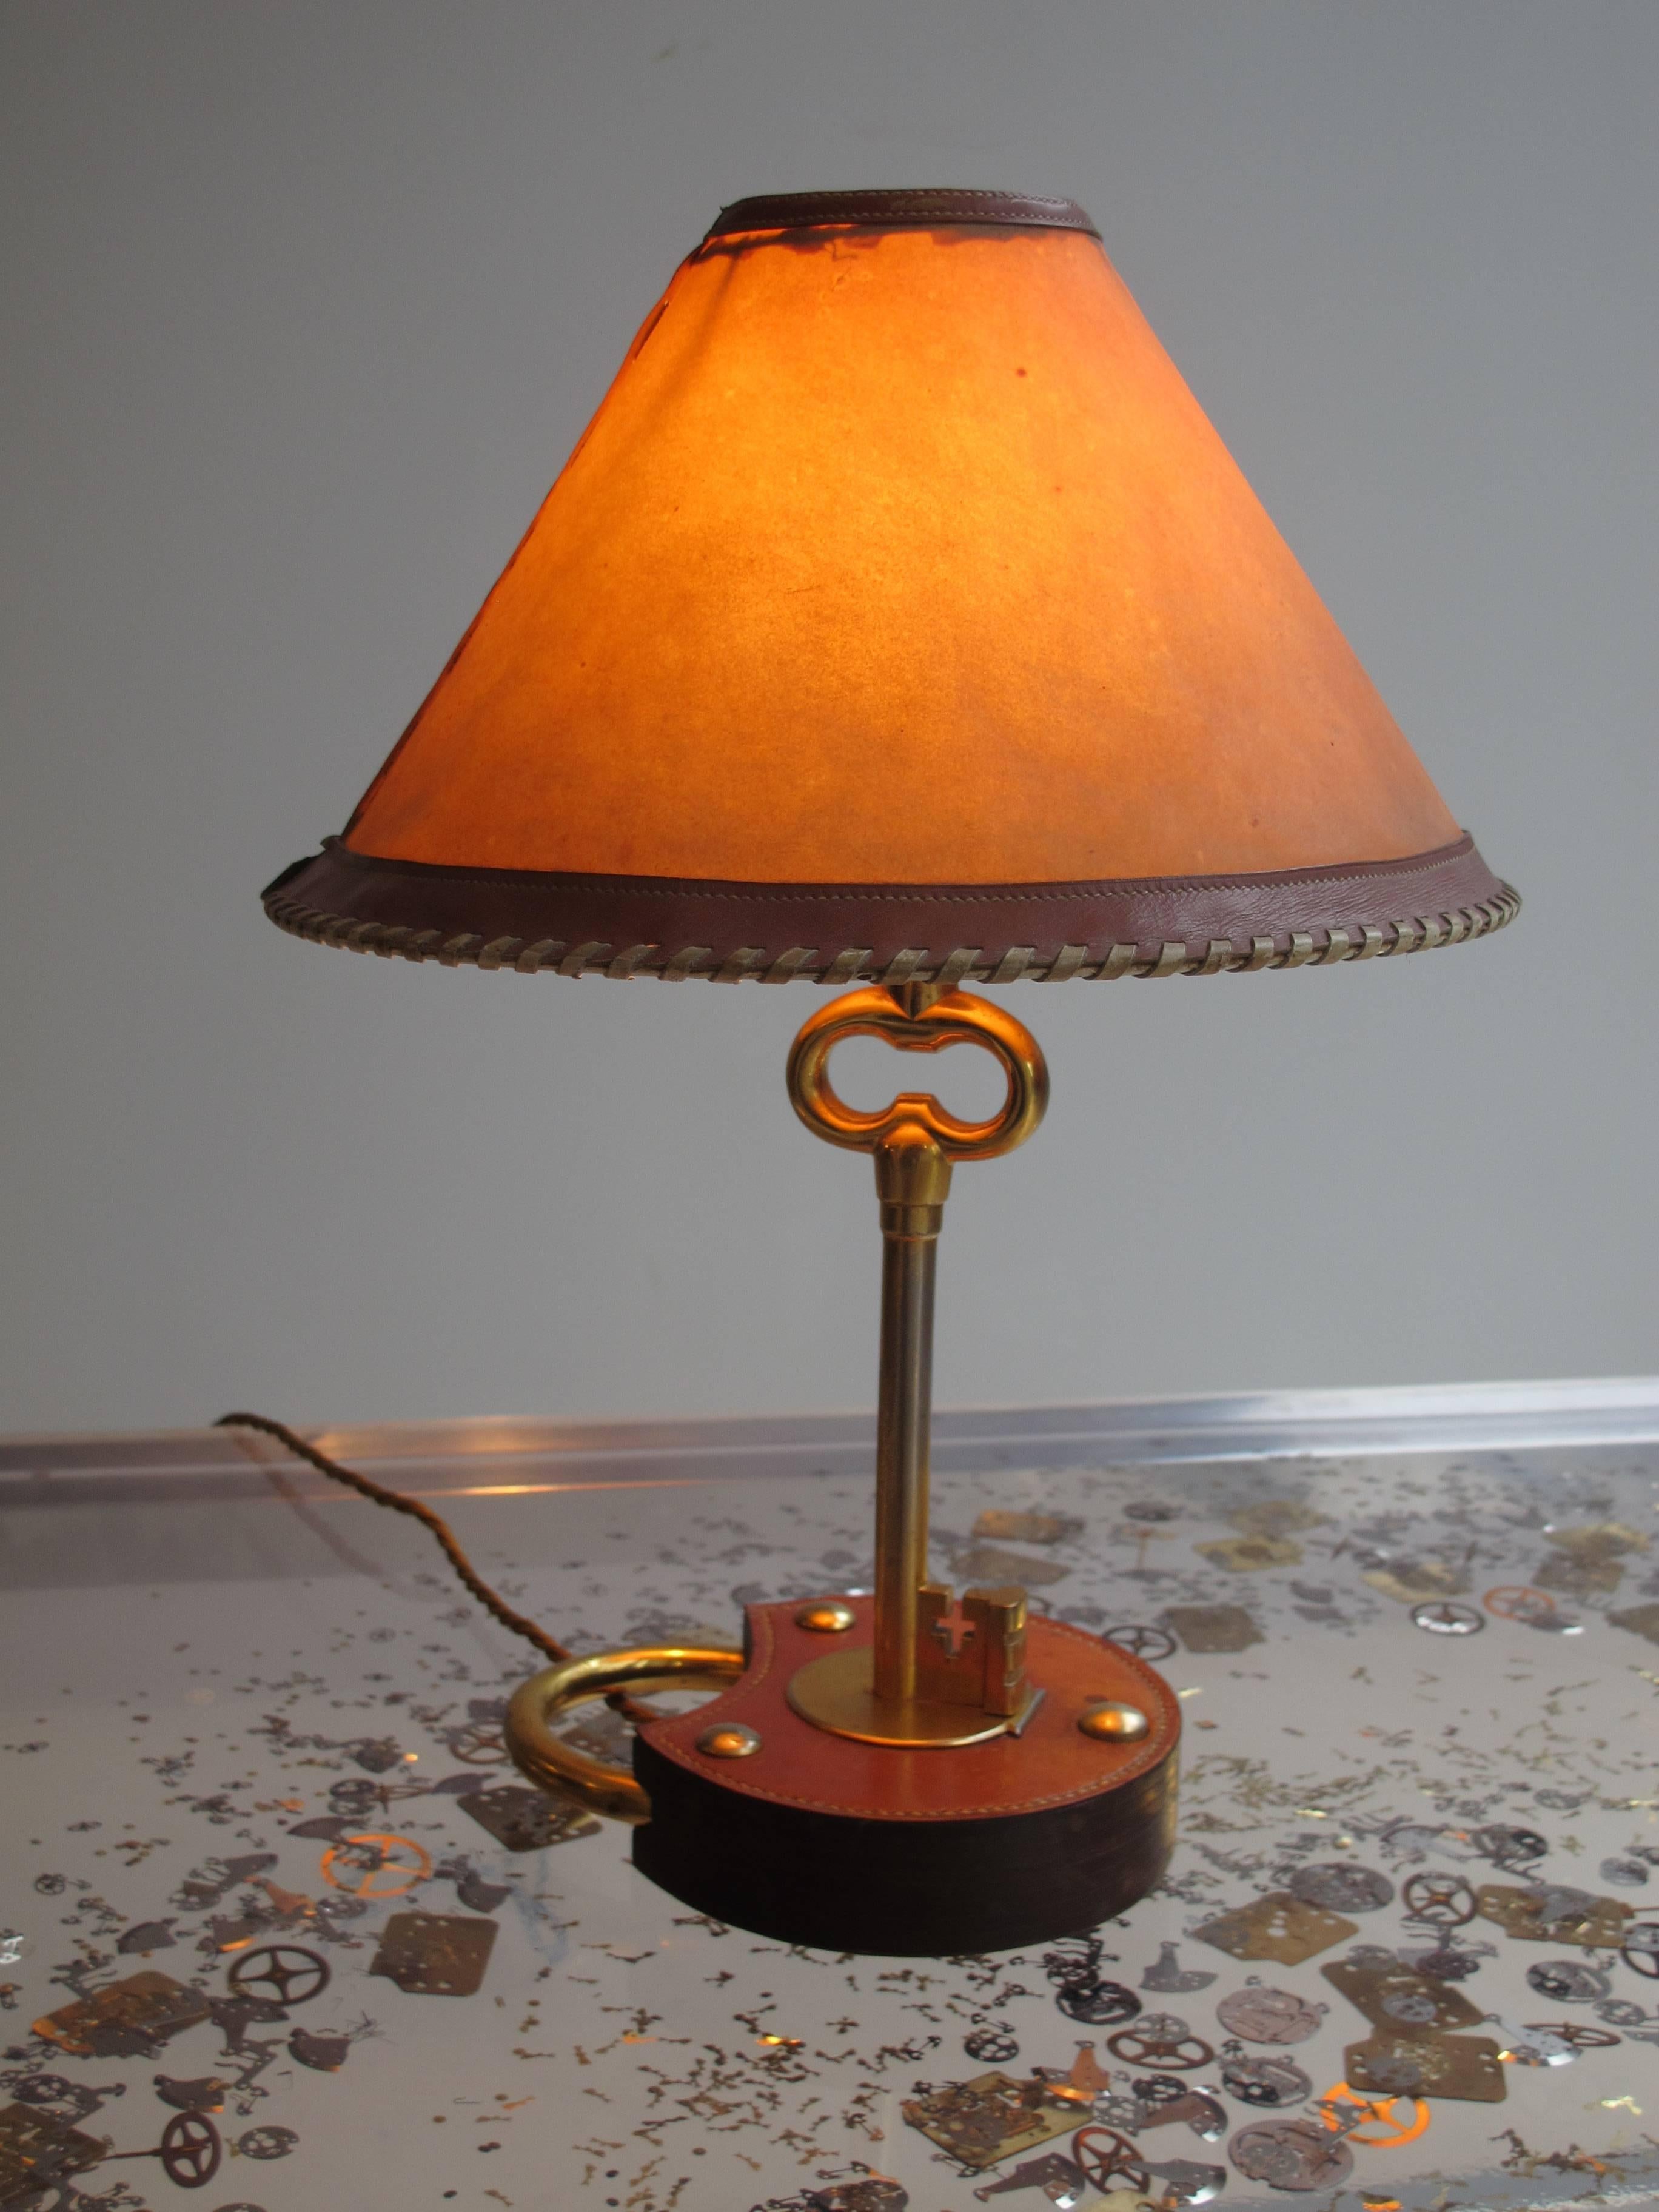 Rare lock and key table lamp, gilt metal, stitched leather and parchment by Hermes 

The shade is in parchment and leather band, there is a 2 cm rip on the shade.

On the stem of the key there is a loss of gilt showing the under the metal.

In